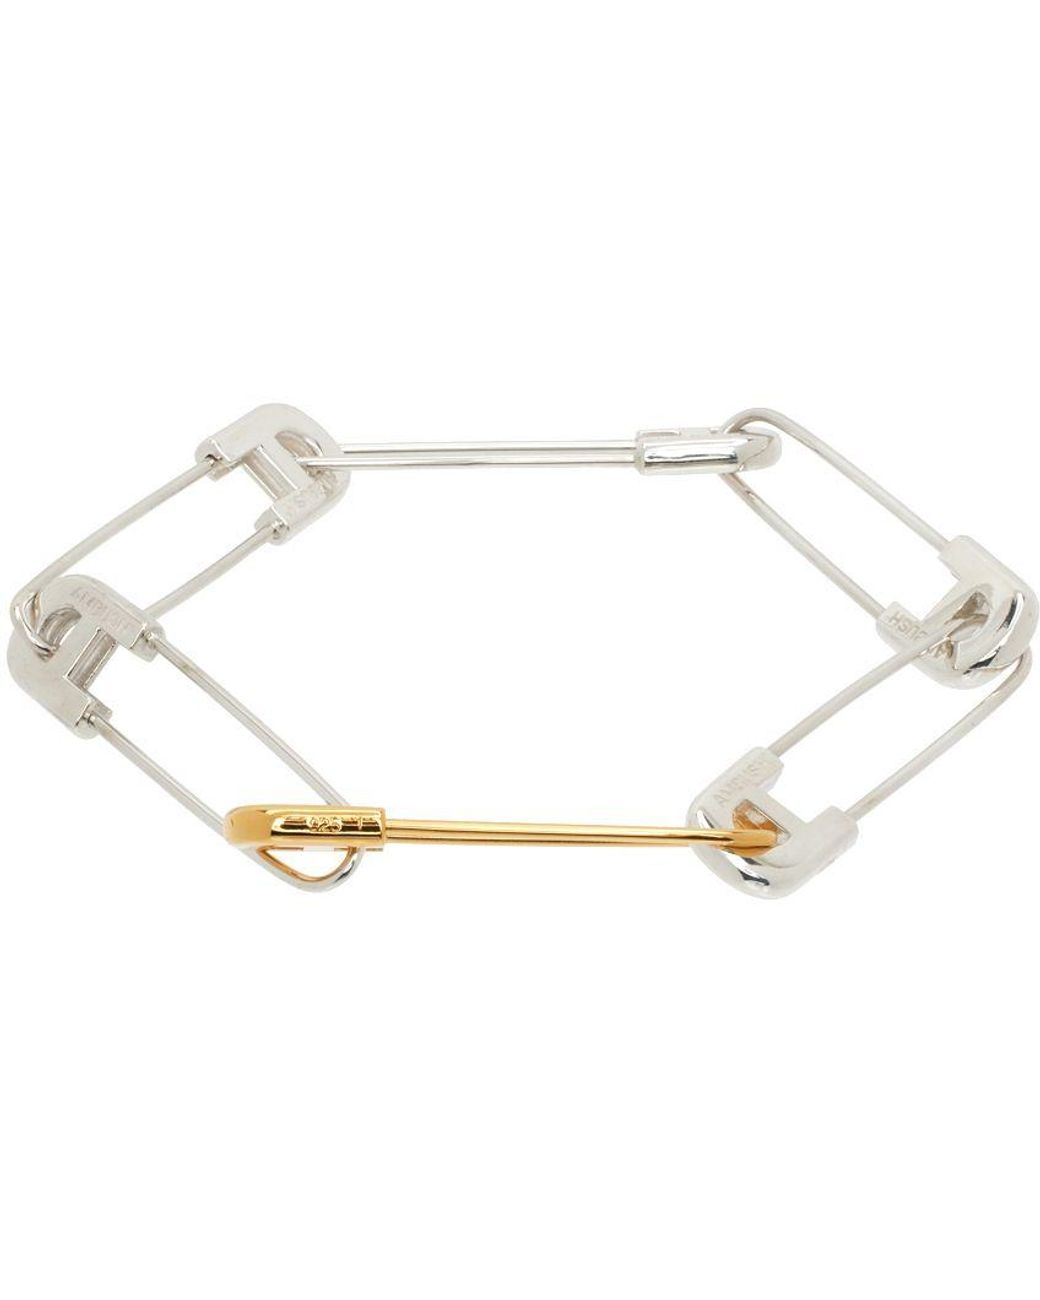 Gold Safety Pins | ShopStyle